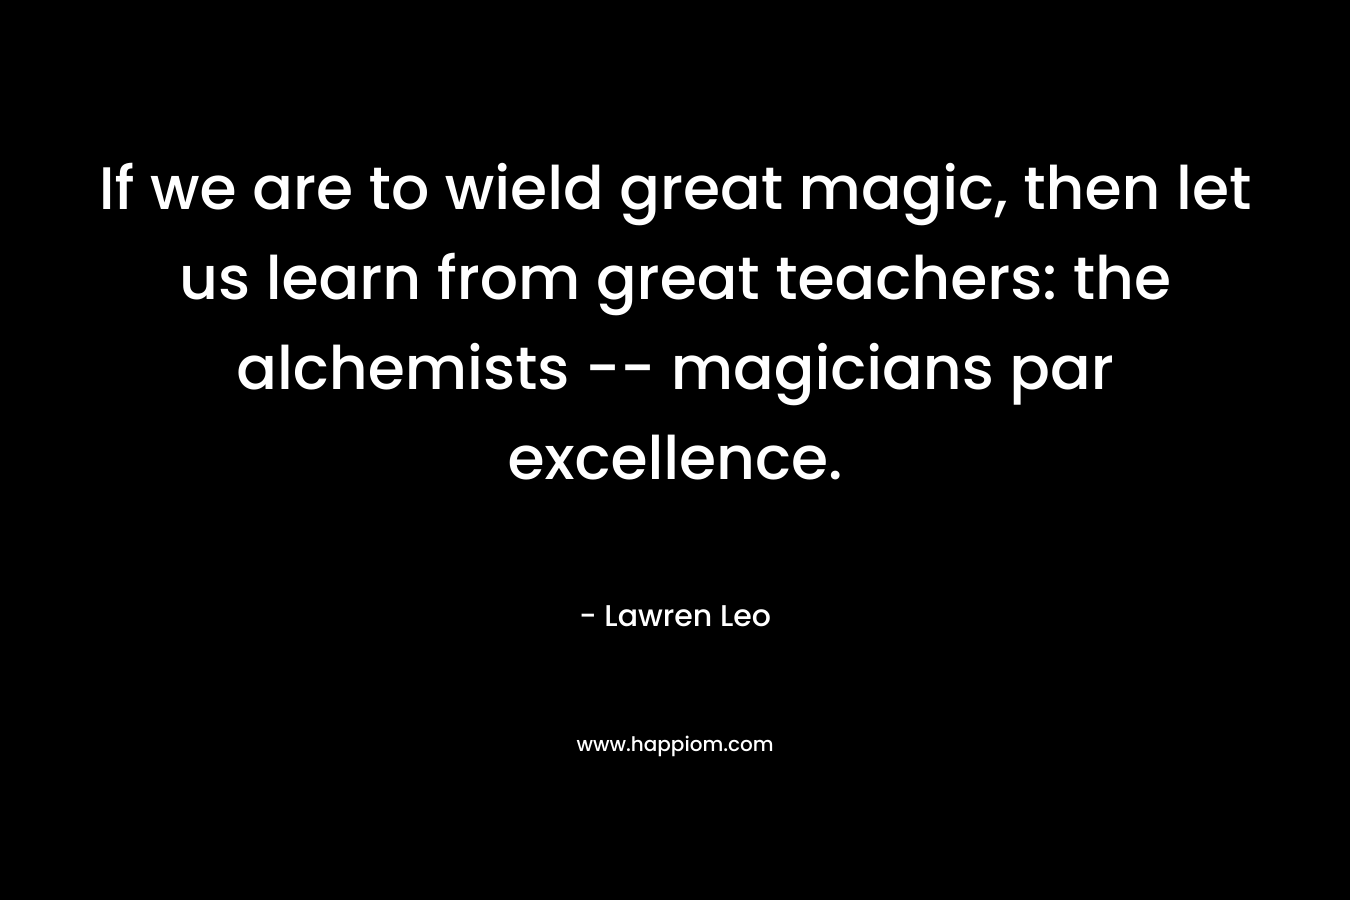 If we are to wield great magic, then let us learn from great teachers: the alchemists — magicians par excellence. – Lawren Leo